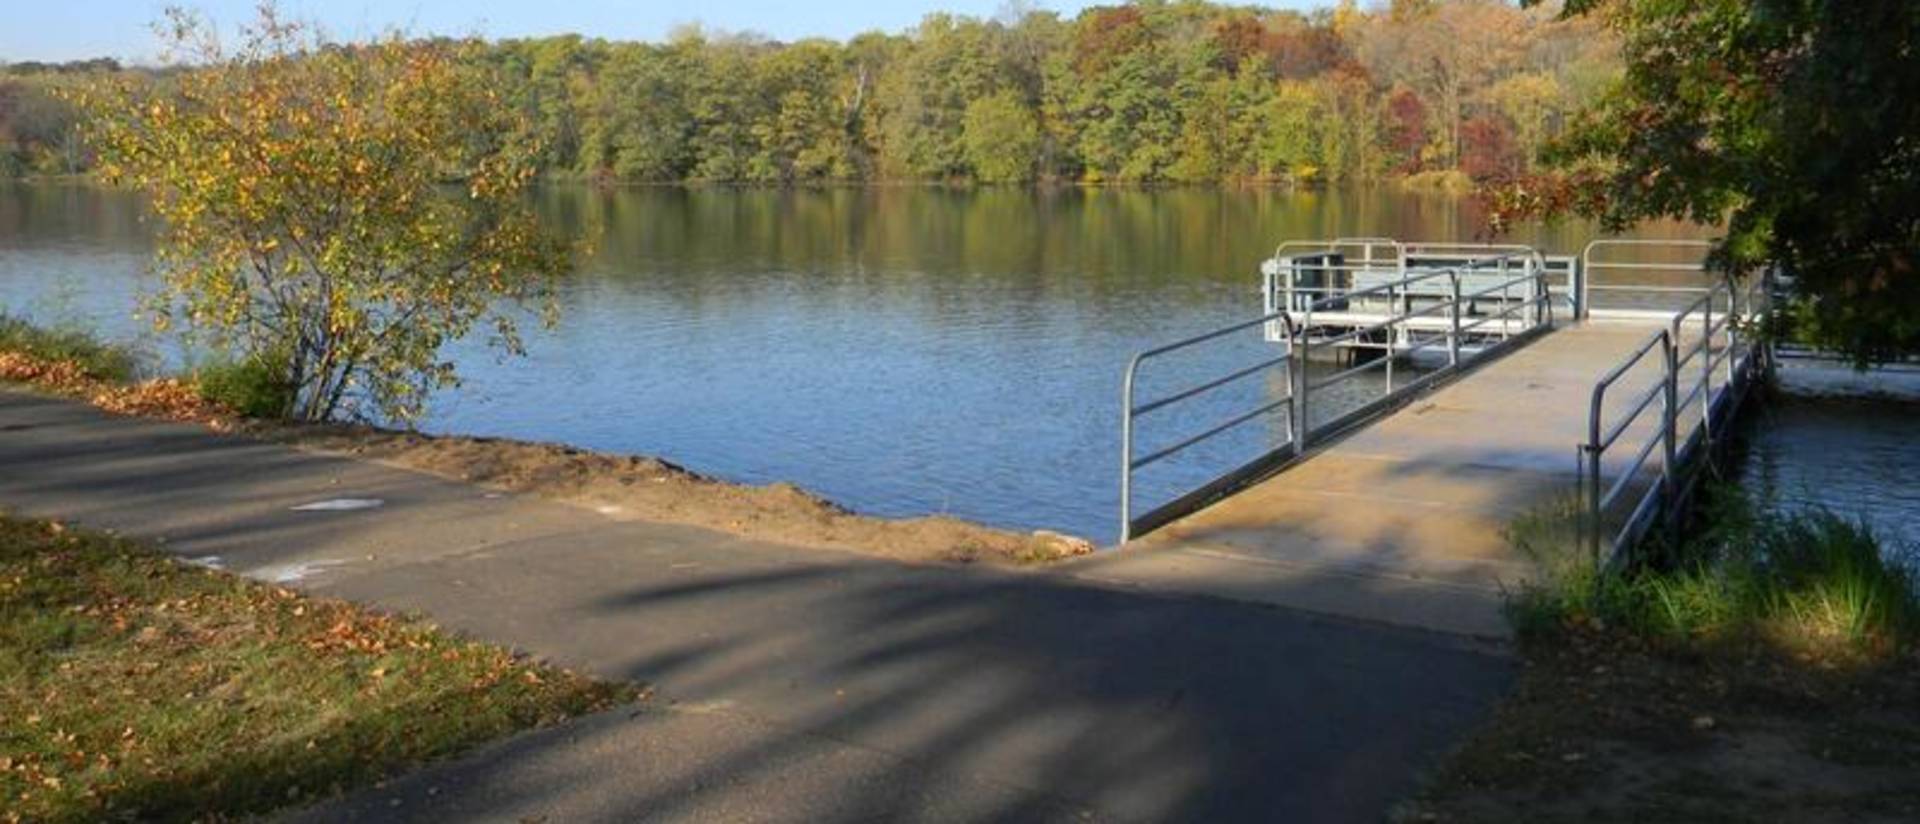 This image, part of McIntyre Library’s "ADA30: Accessibility in the Chippewa Valley" online exhibit, depicts the Braun's Bay accessible boat launch into Half Moon Lake in Eau Claire.